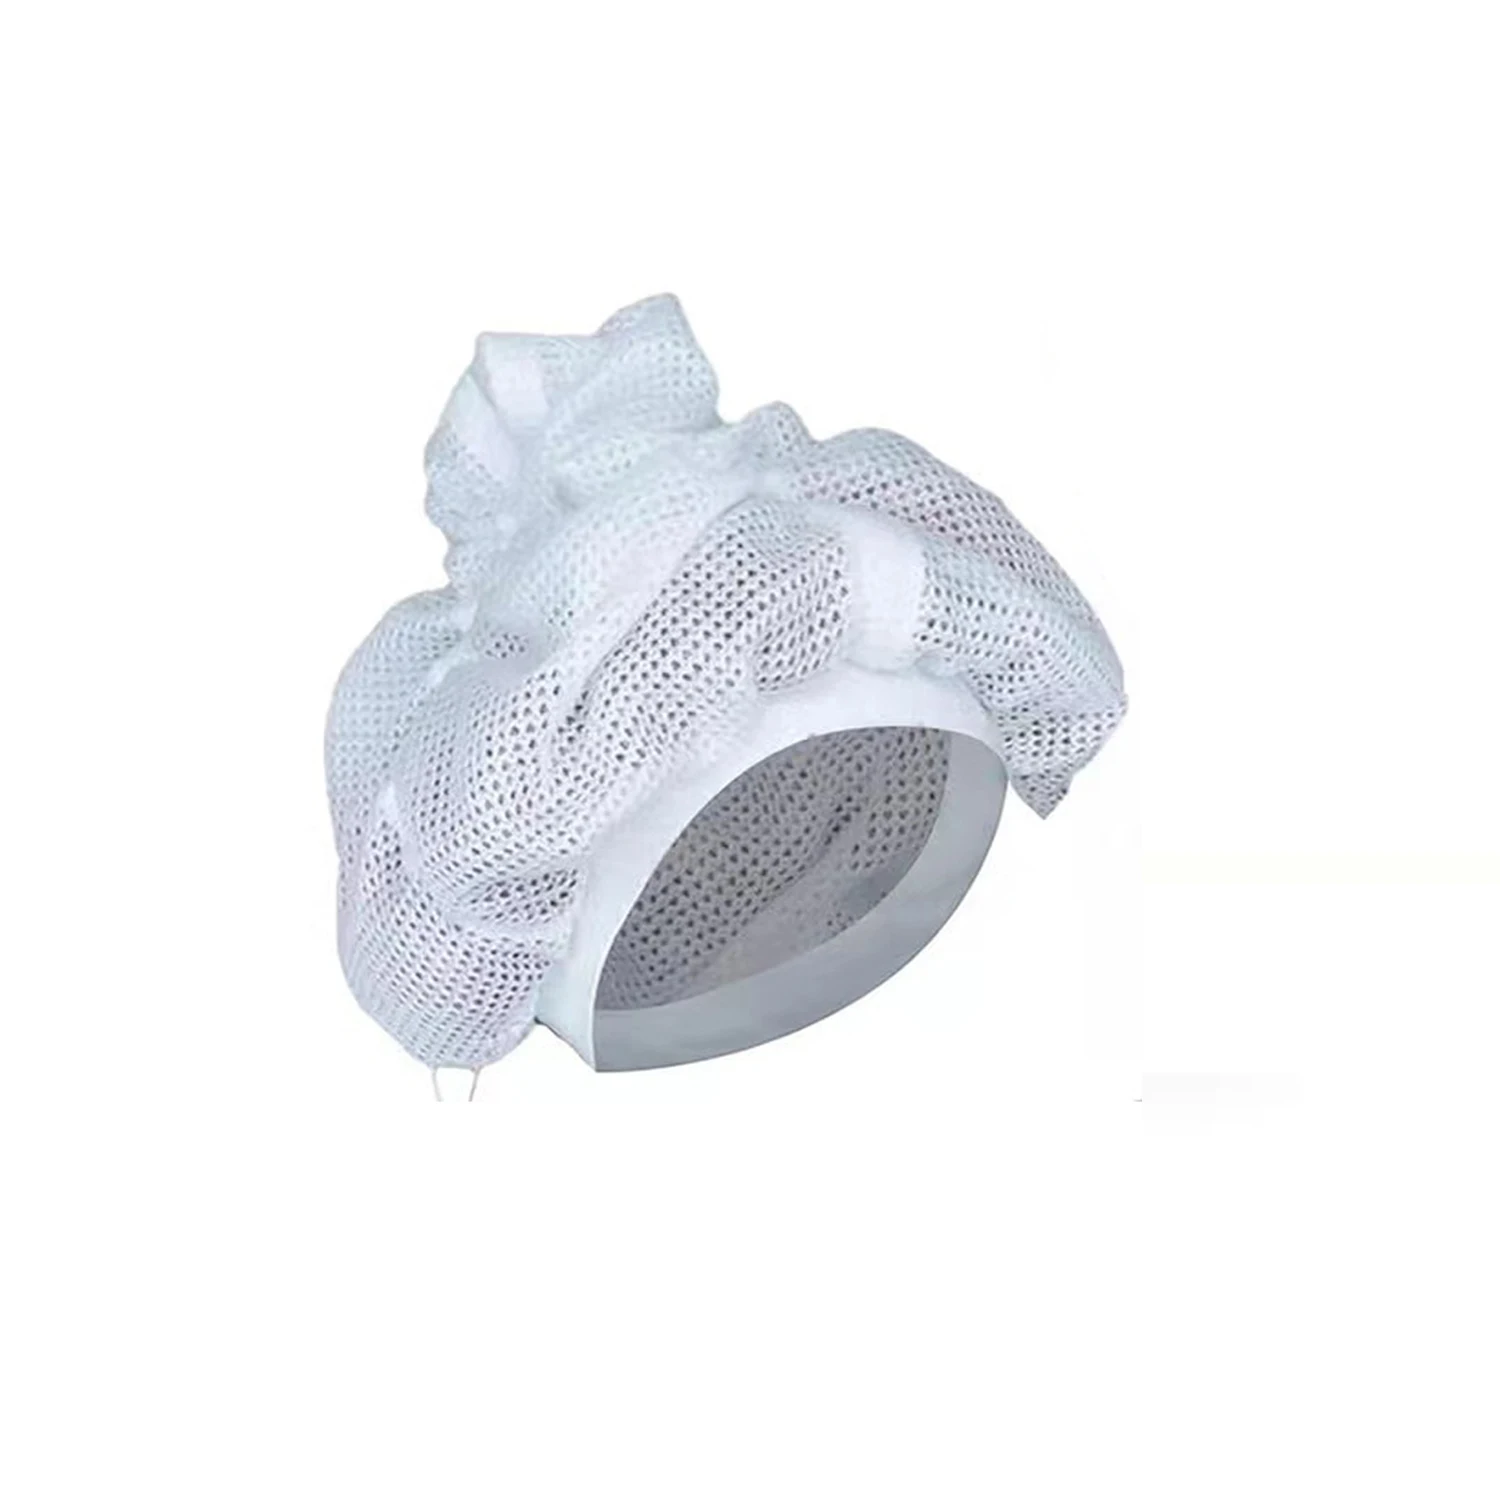 Net Plopping Cap For Drying Curly Hair With Drawstring Adjustable Large Hair Bonnet Mesh Hair Drying Soulta Net Plopping Bonnet